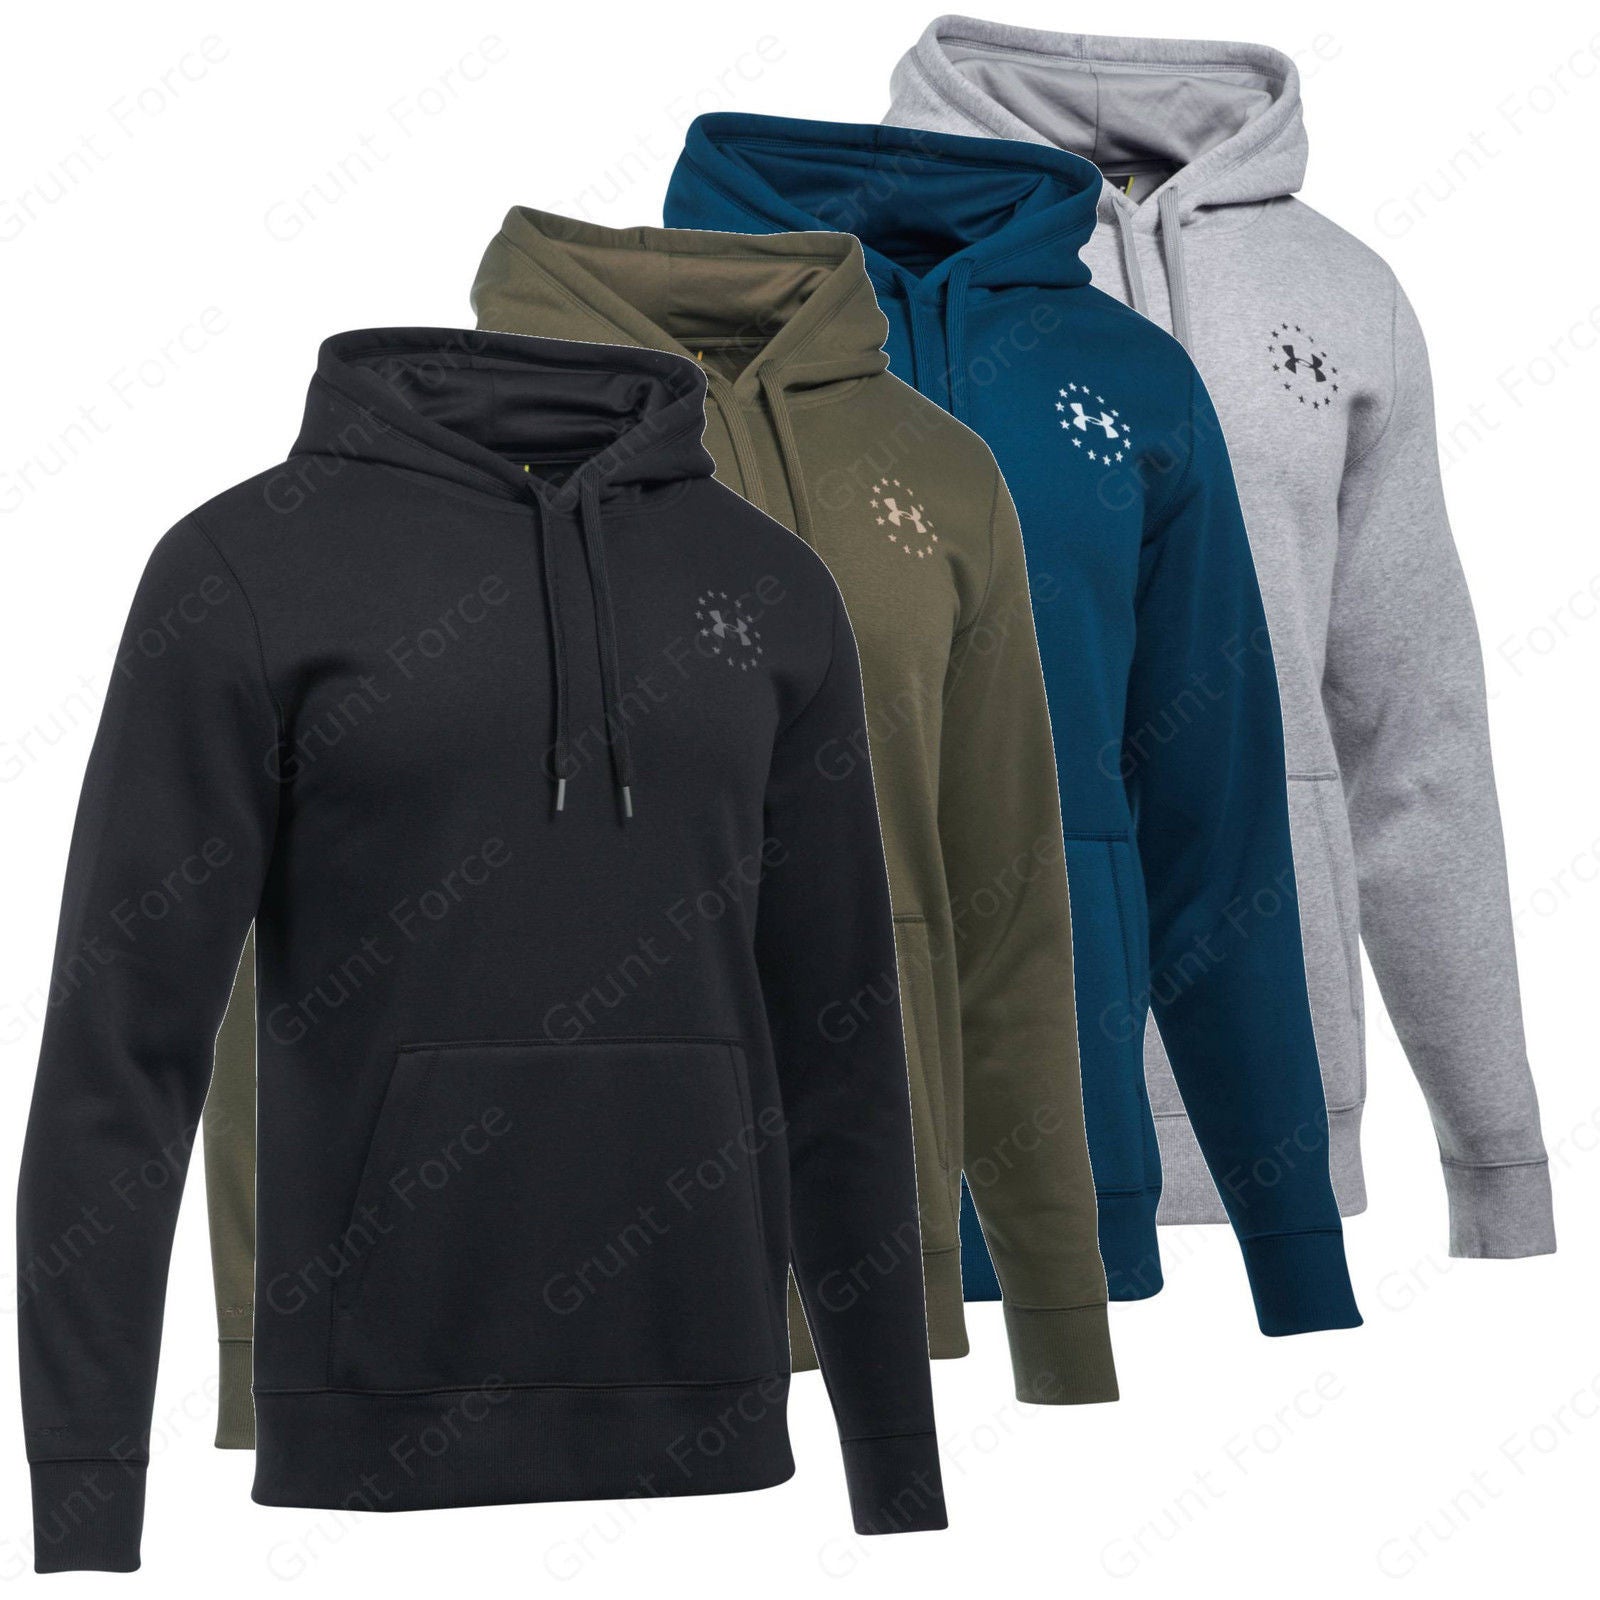 Under Armour Men's Sweatshirts - UA Freedom Flag Rival Tactical Hoodie ...